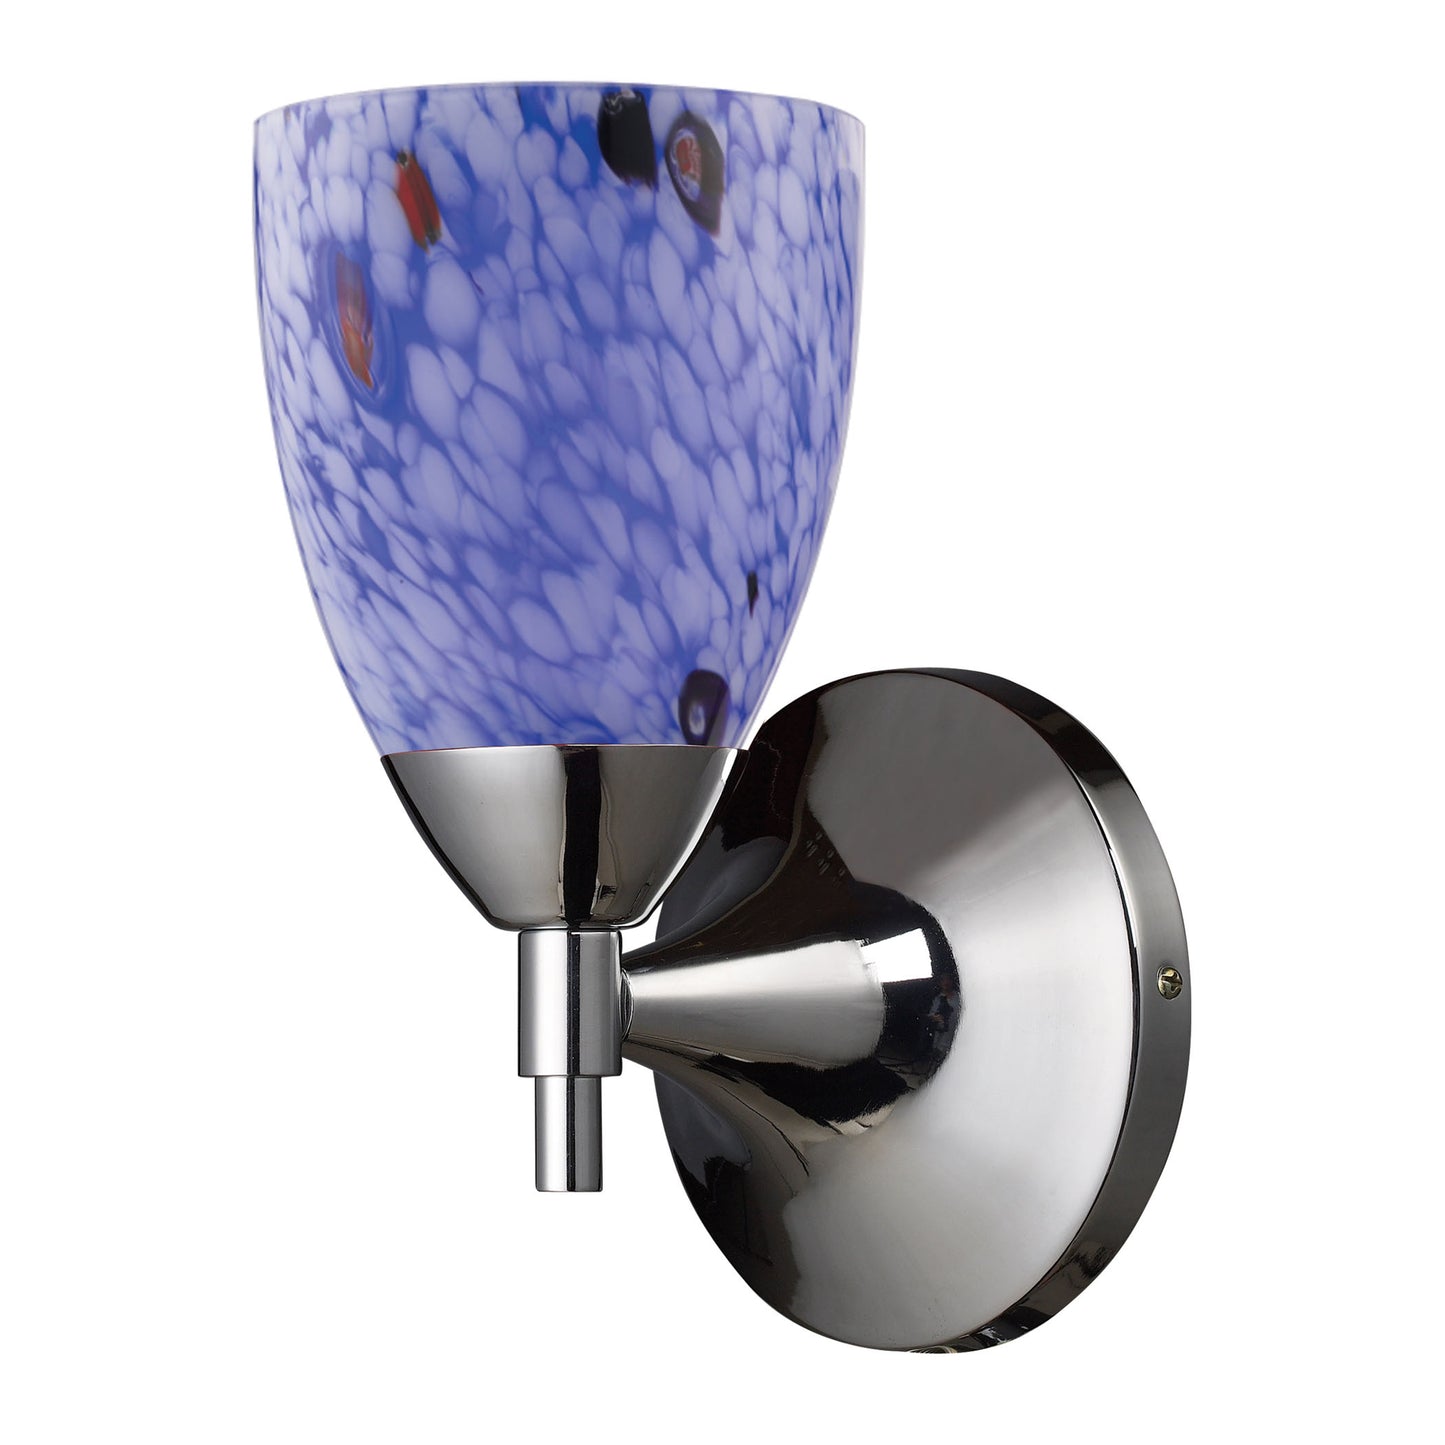 Celina 1-Light Wall Lamp in Polished Chrome with Starburst Blue Glass